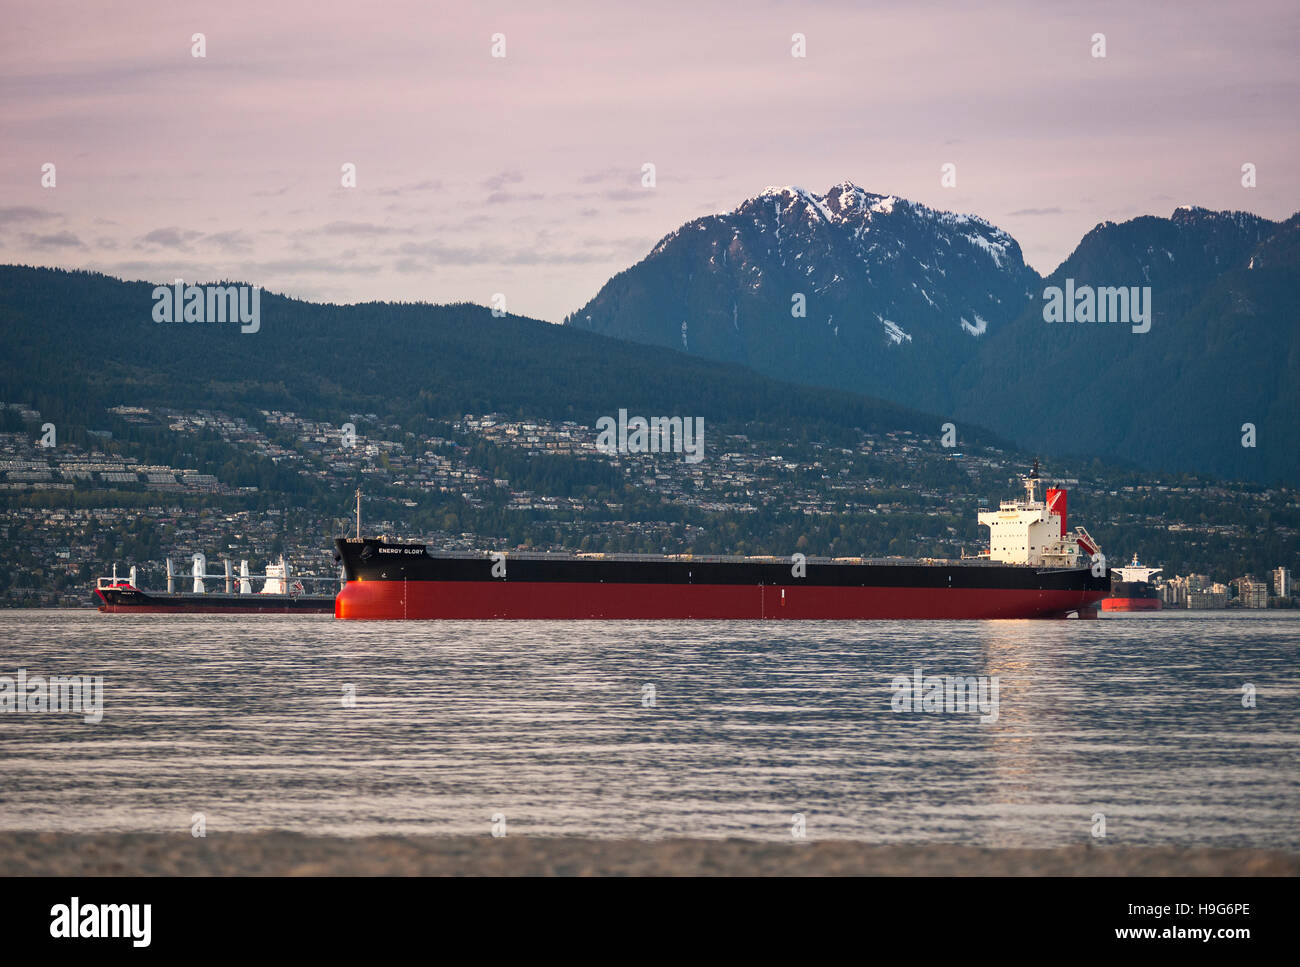 Tanker shipping traffic in Vancouver, British Columbia. Stock Photo